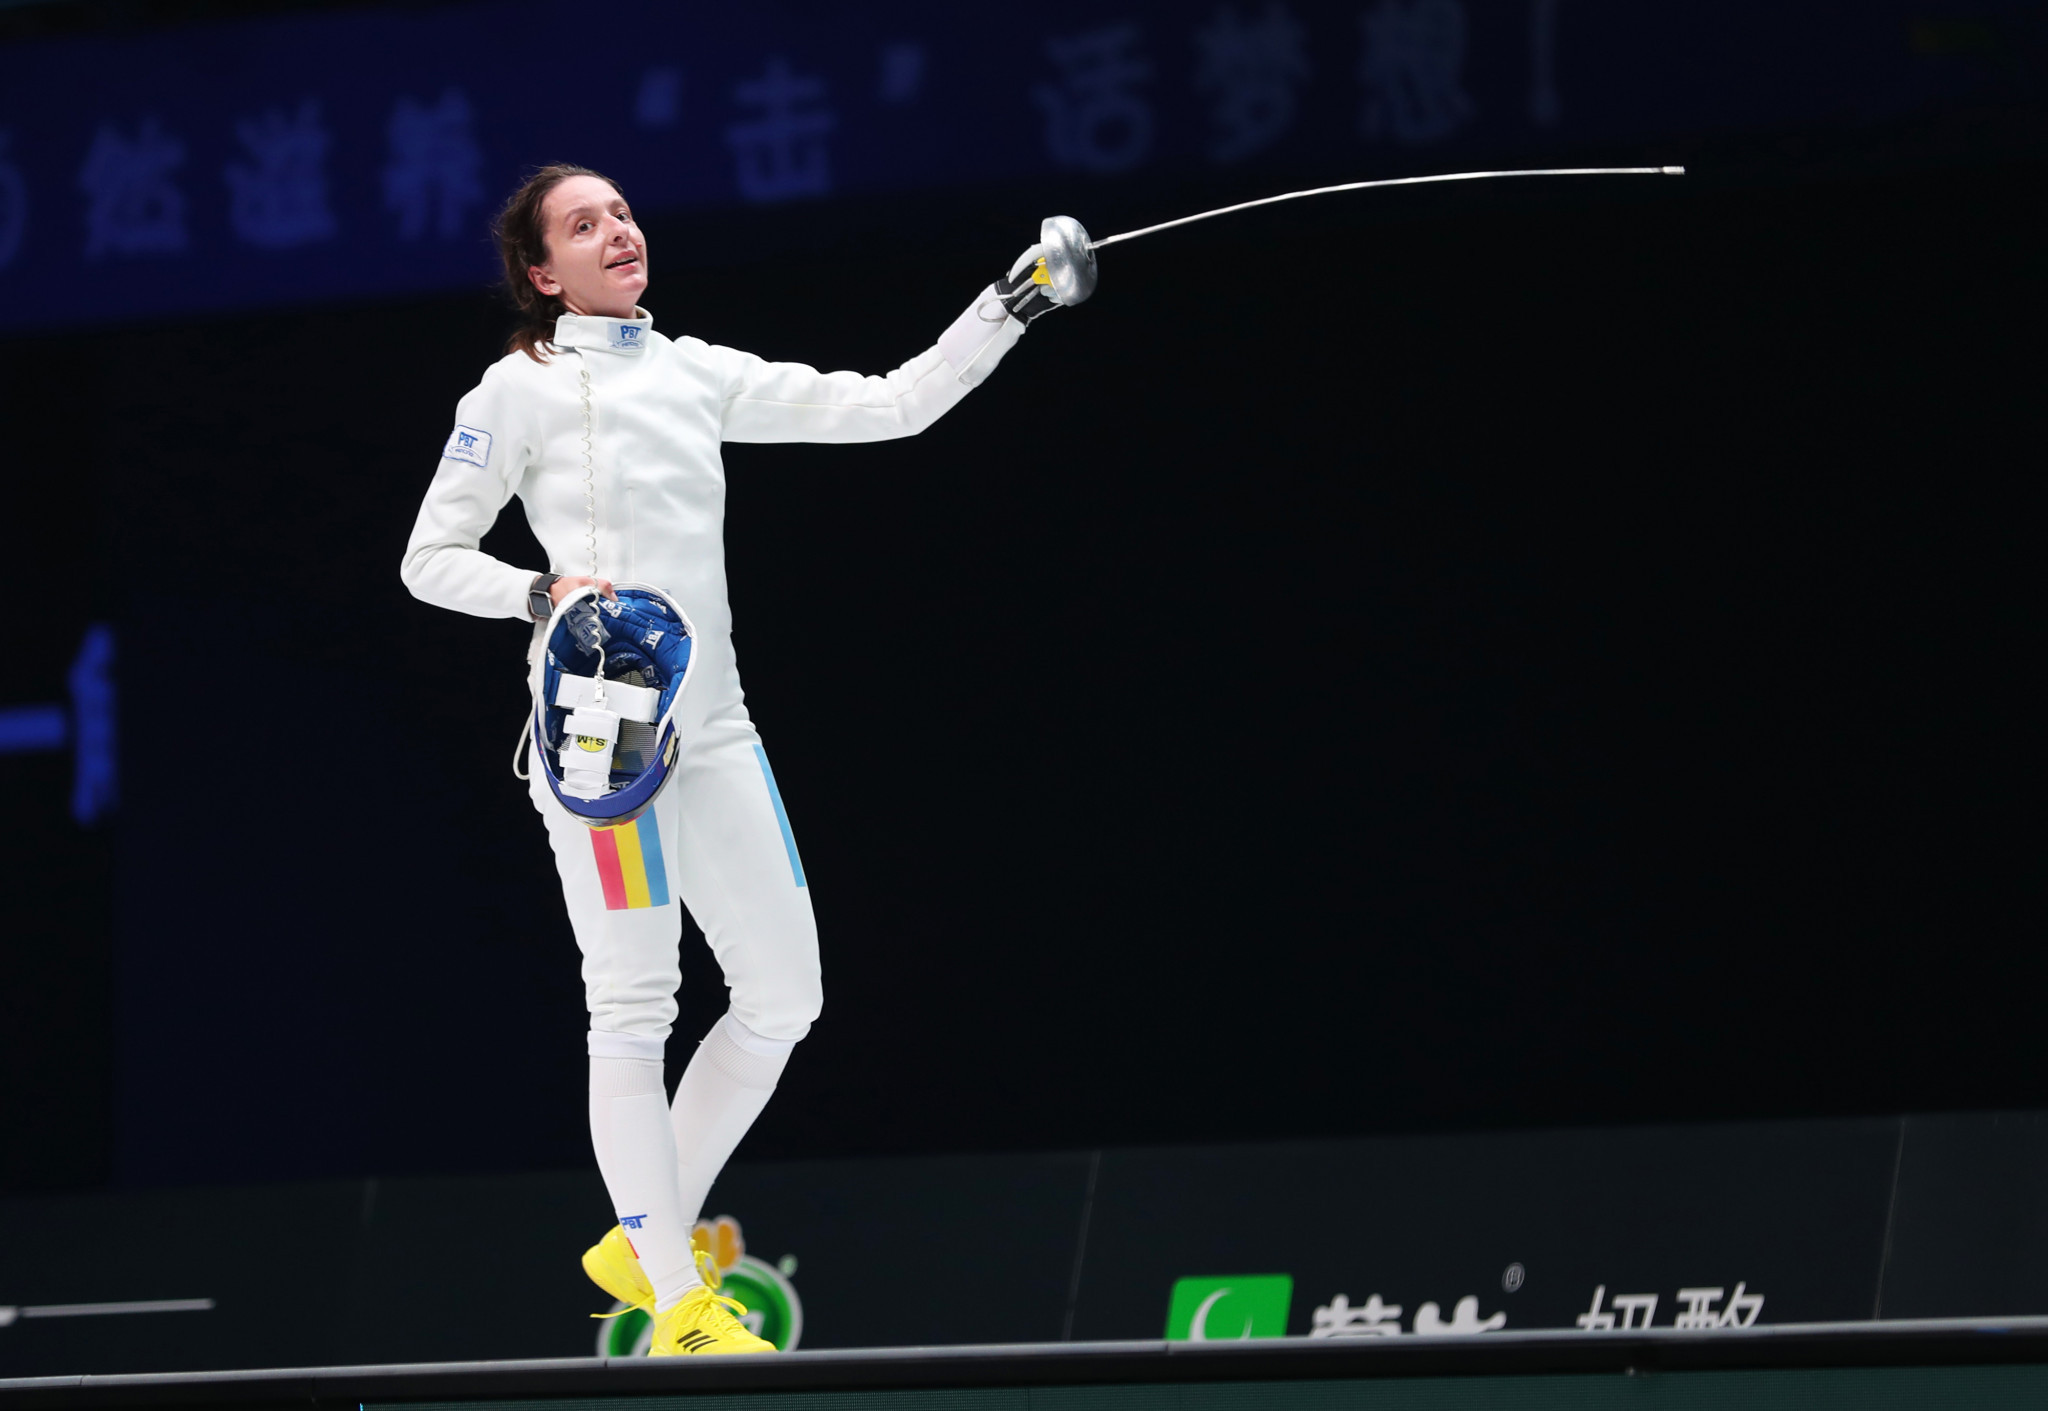 Top-ranked Ana Maria Popescu of Romania will face France's Océane Tahe in the last 64 of the FIE Women's Épée World Cup in Dubai ©Getty Images